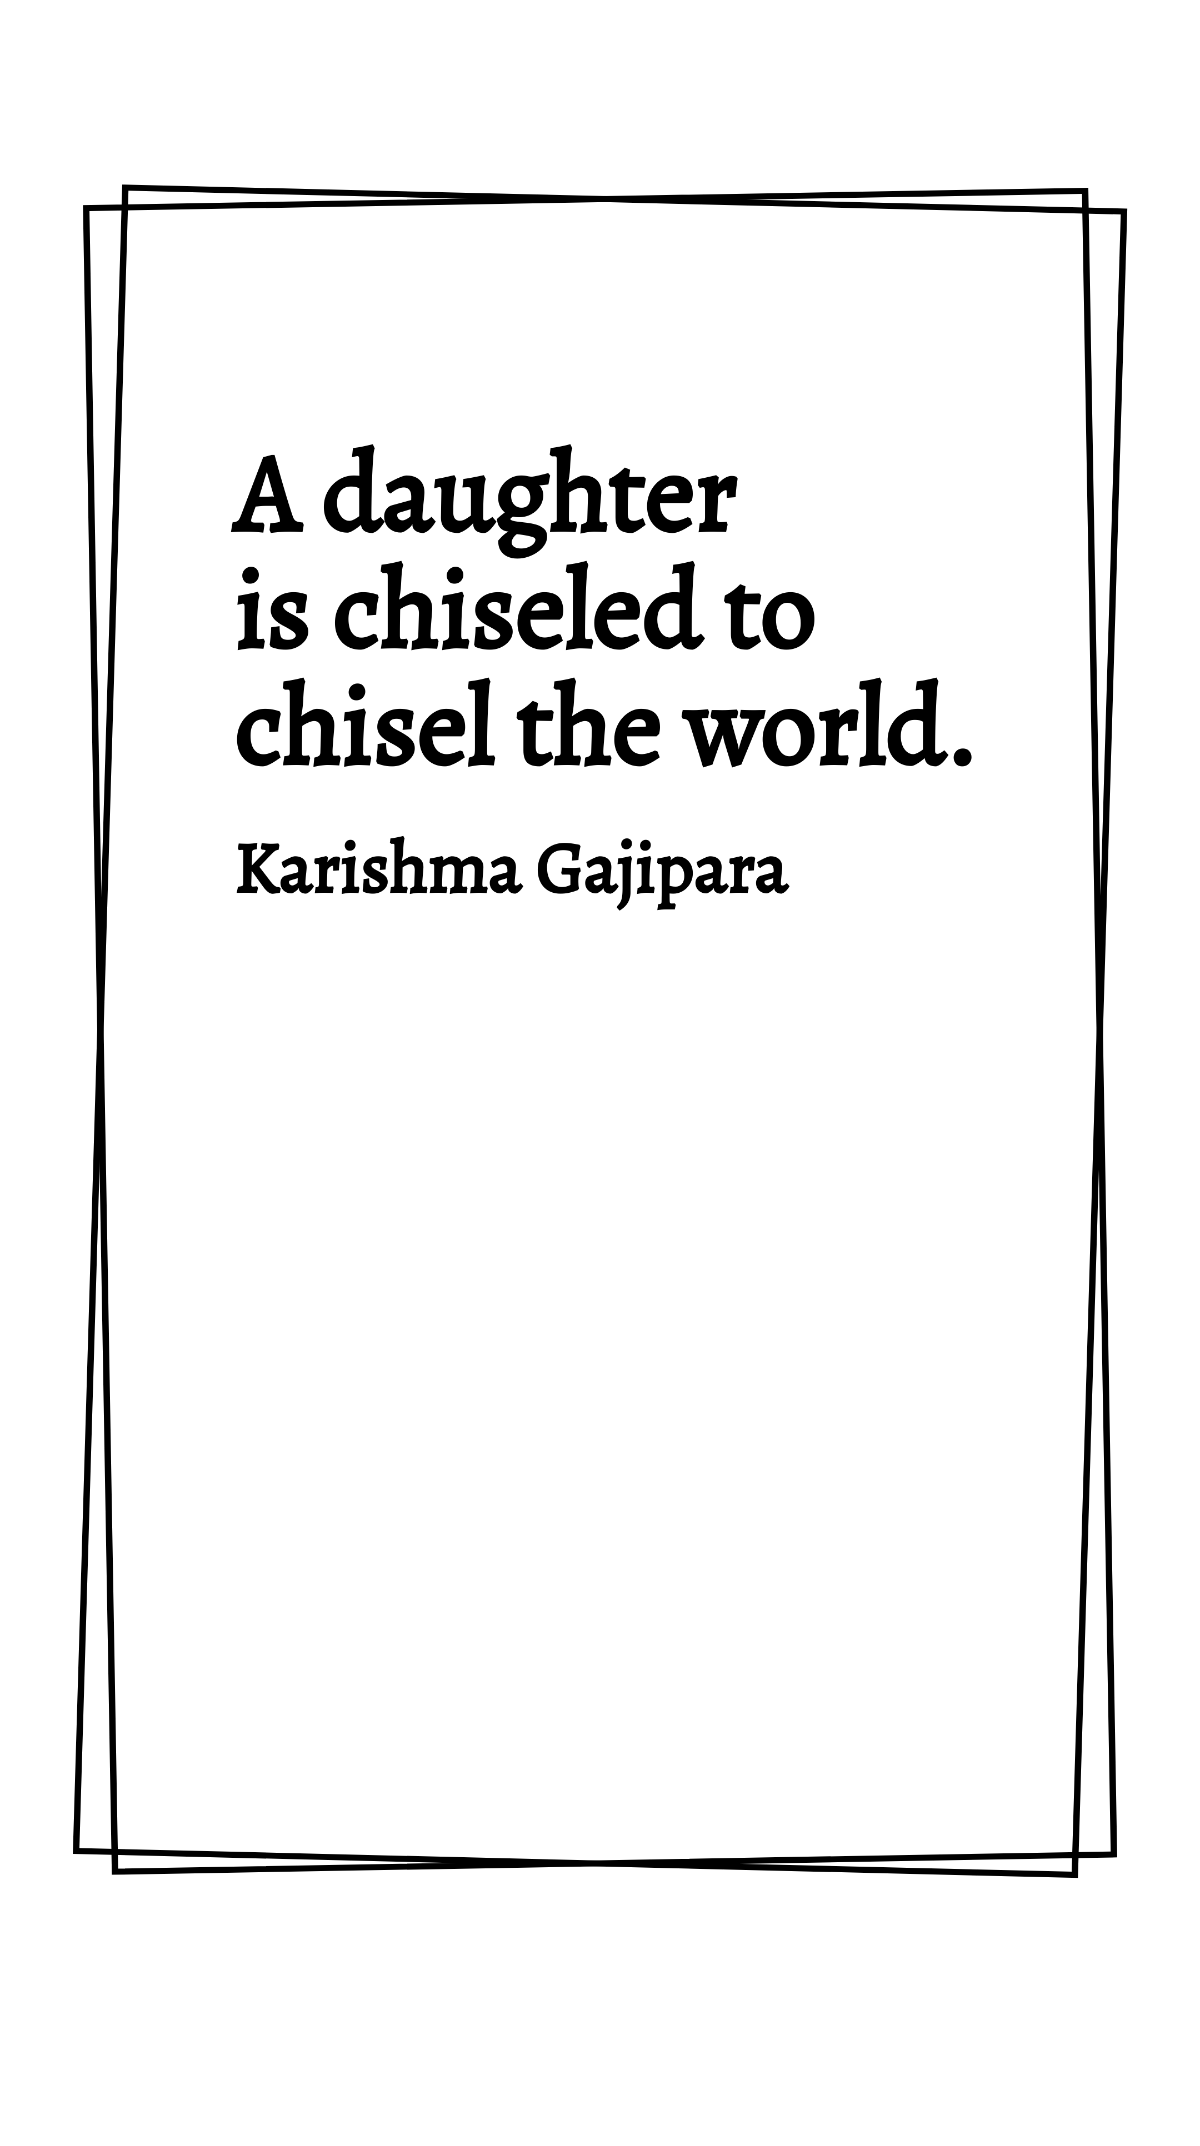 Karishma Gajipara - A daughter is chiseled to chisel the world.